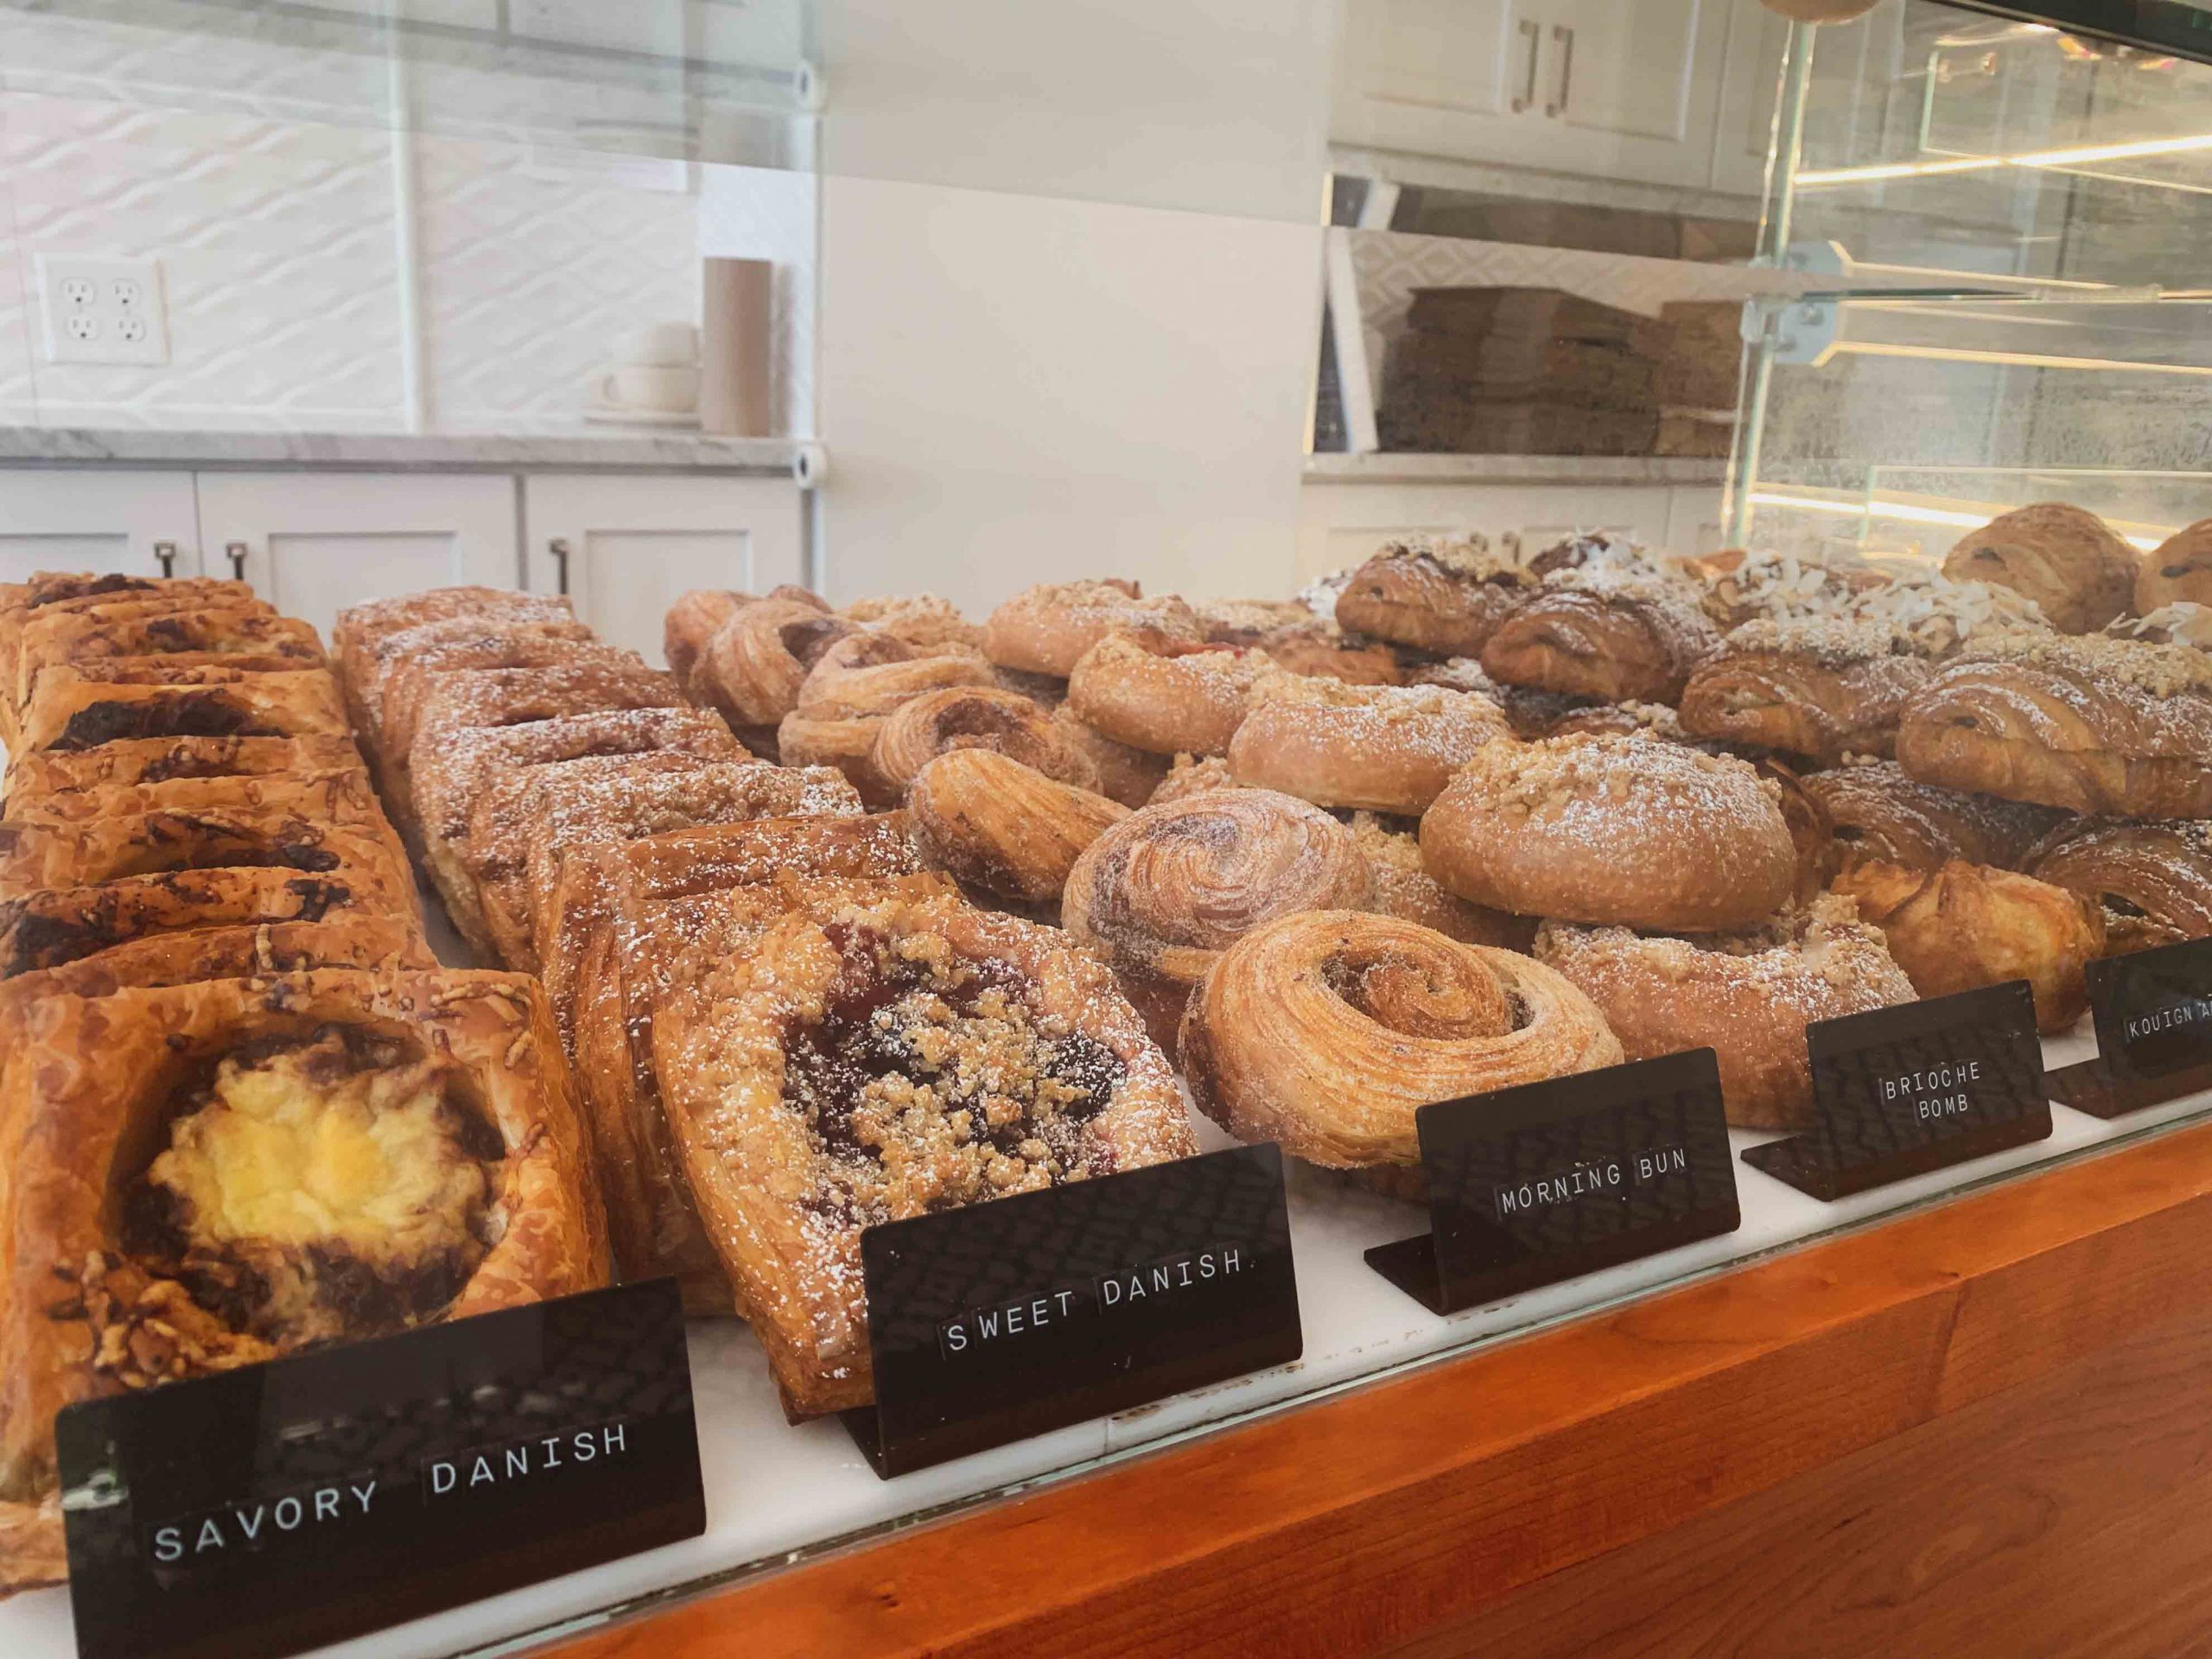 A bakery display case filled with pastries at Butter Block in Buffalo, NY